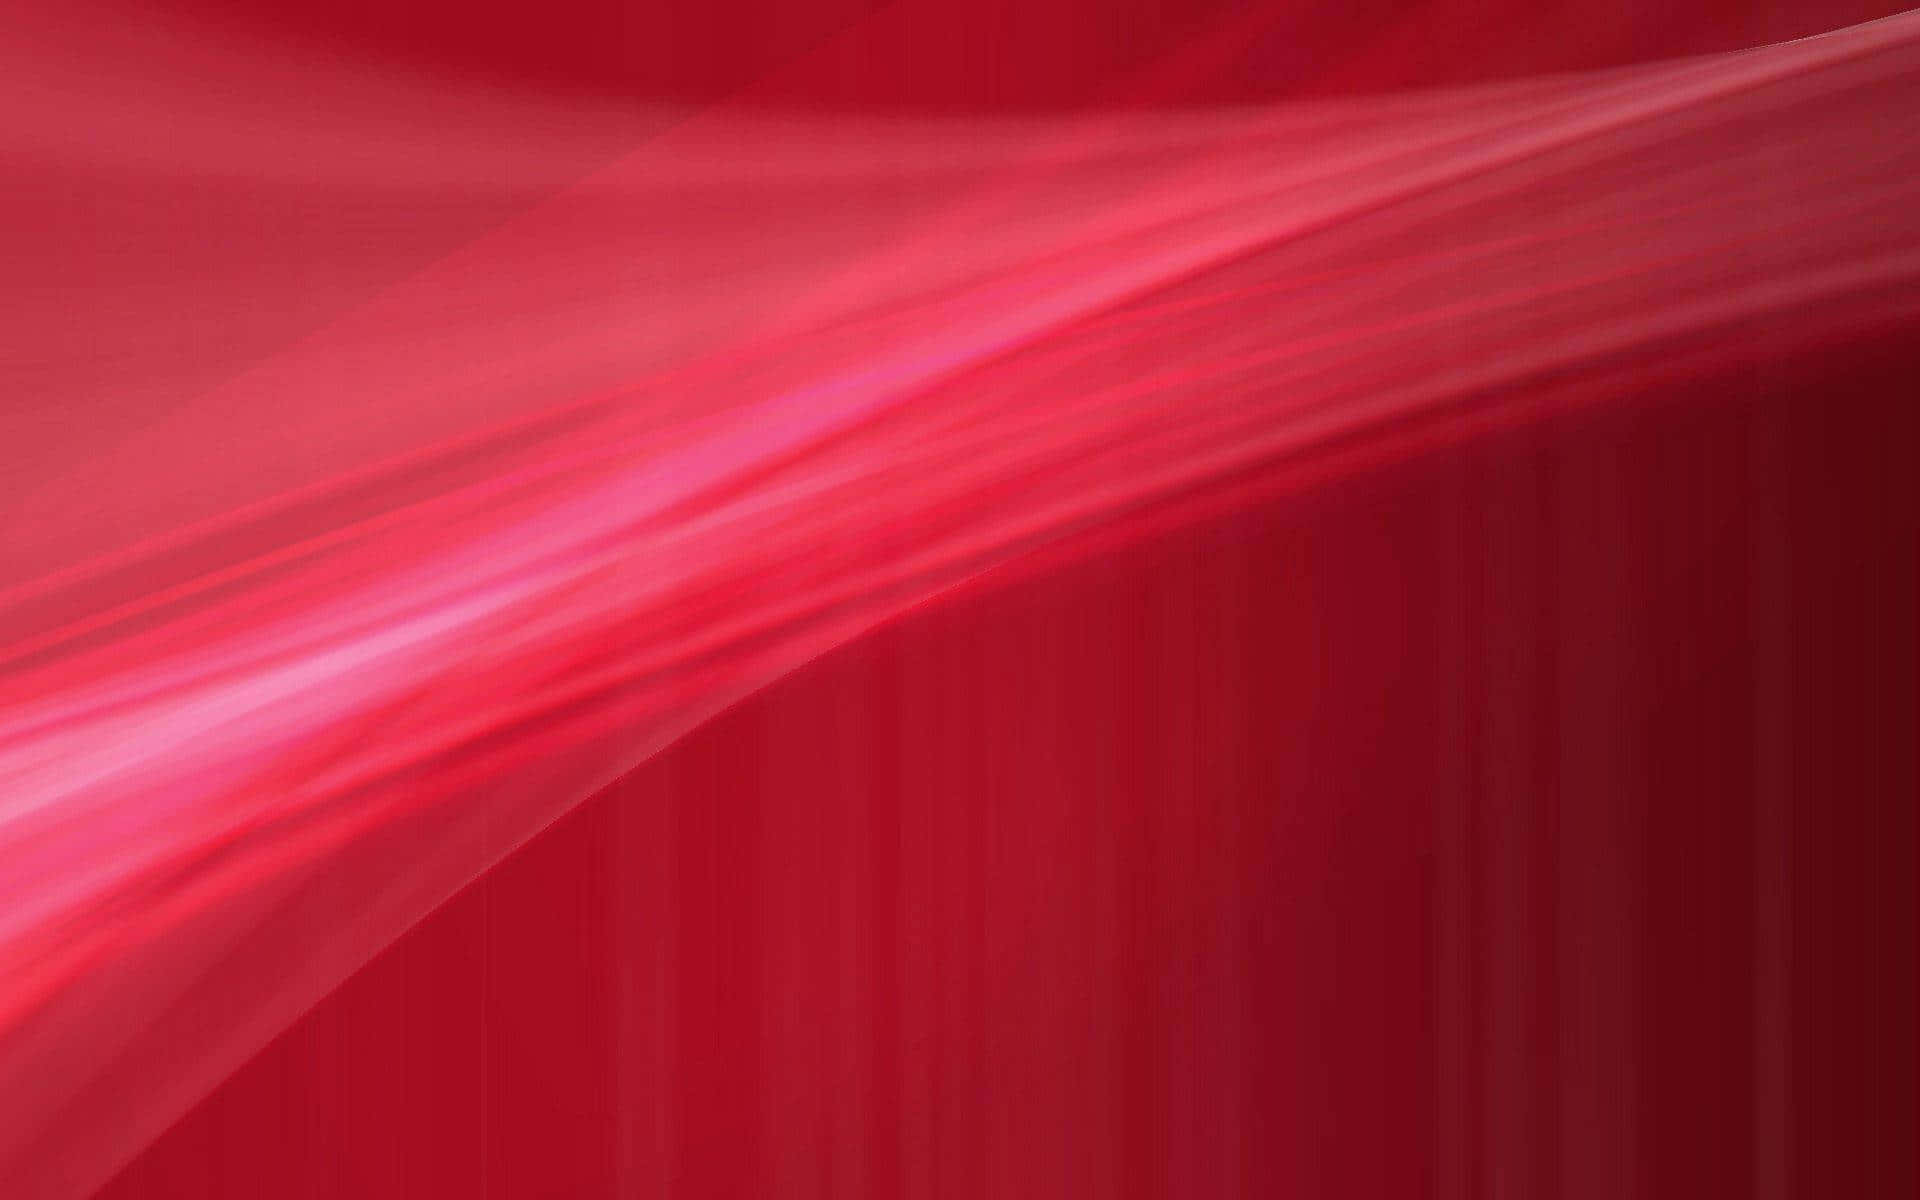 Solid Red Light Rays Wallpaper